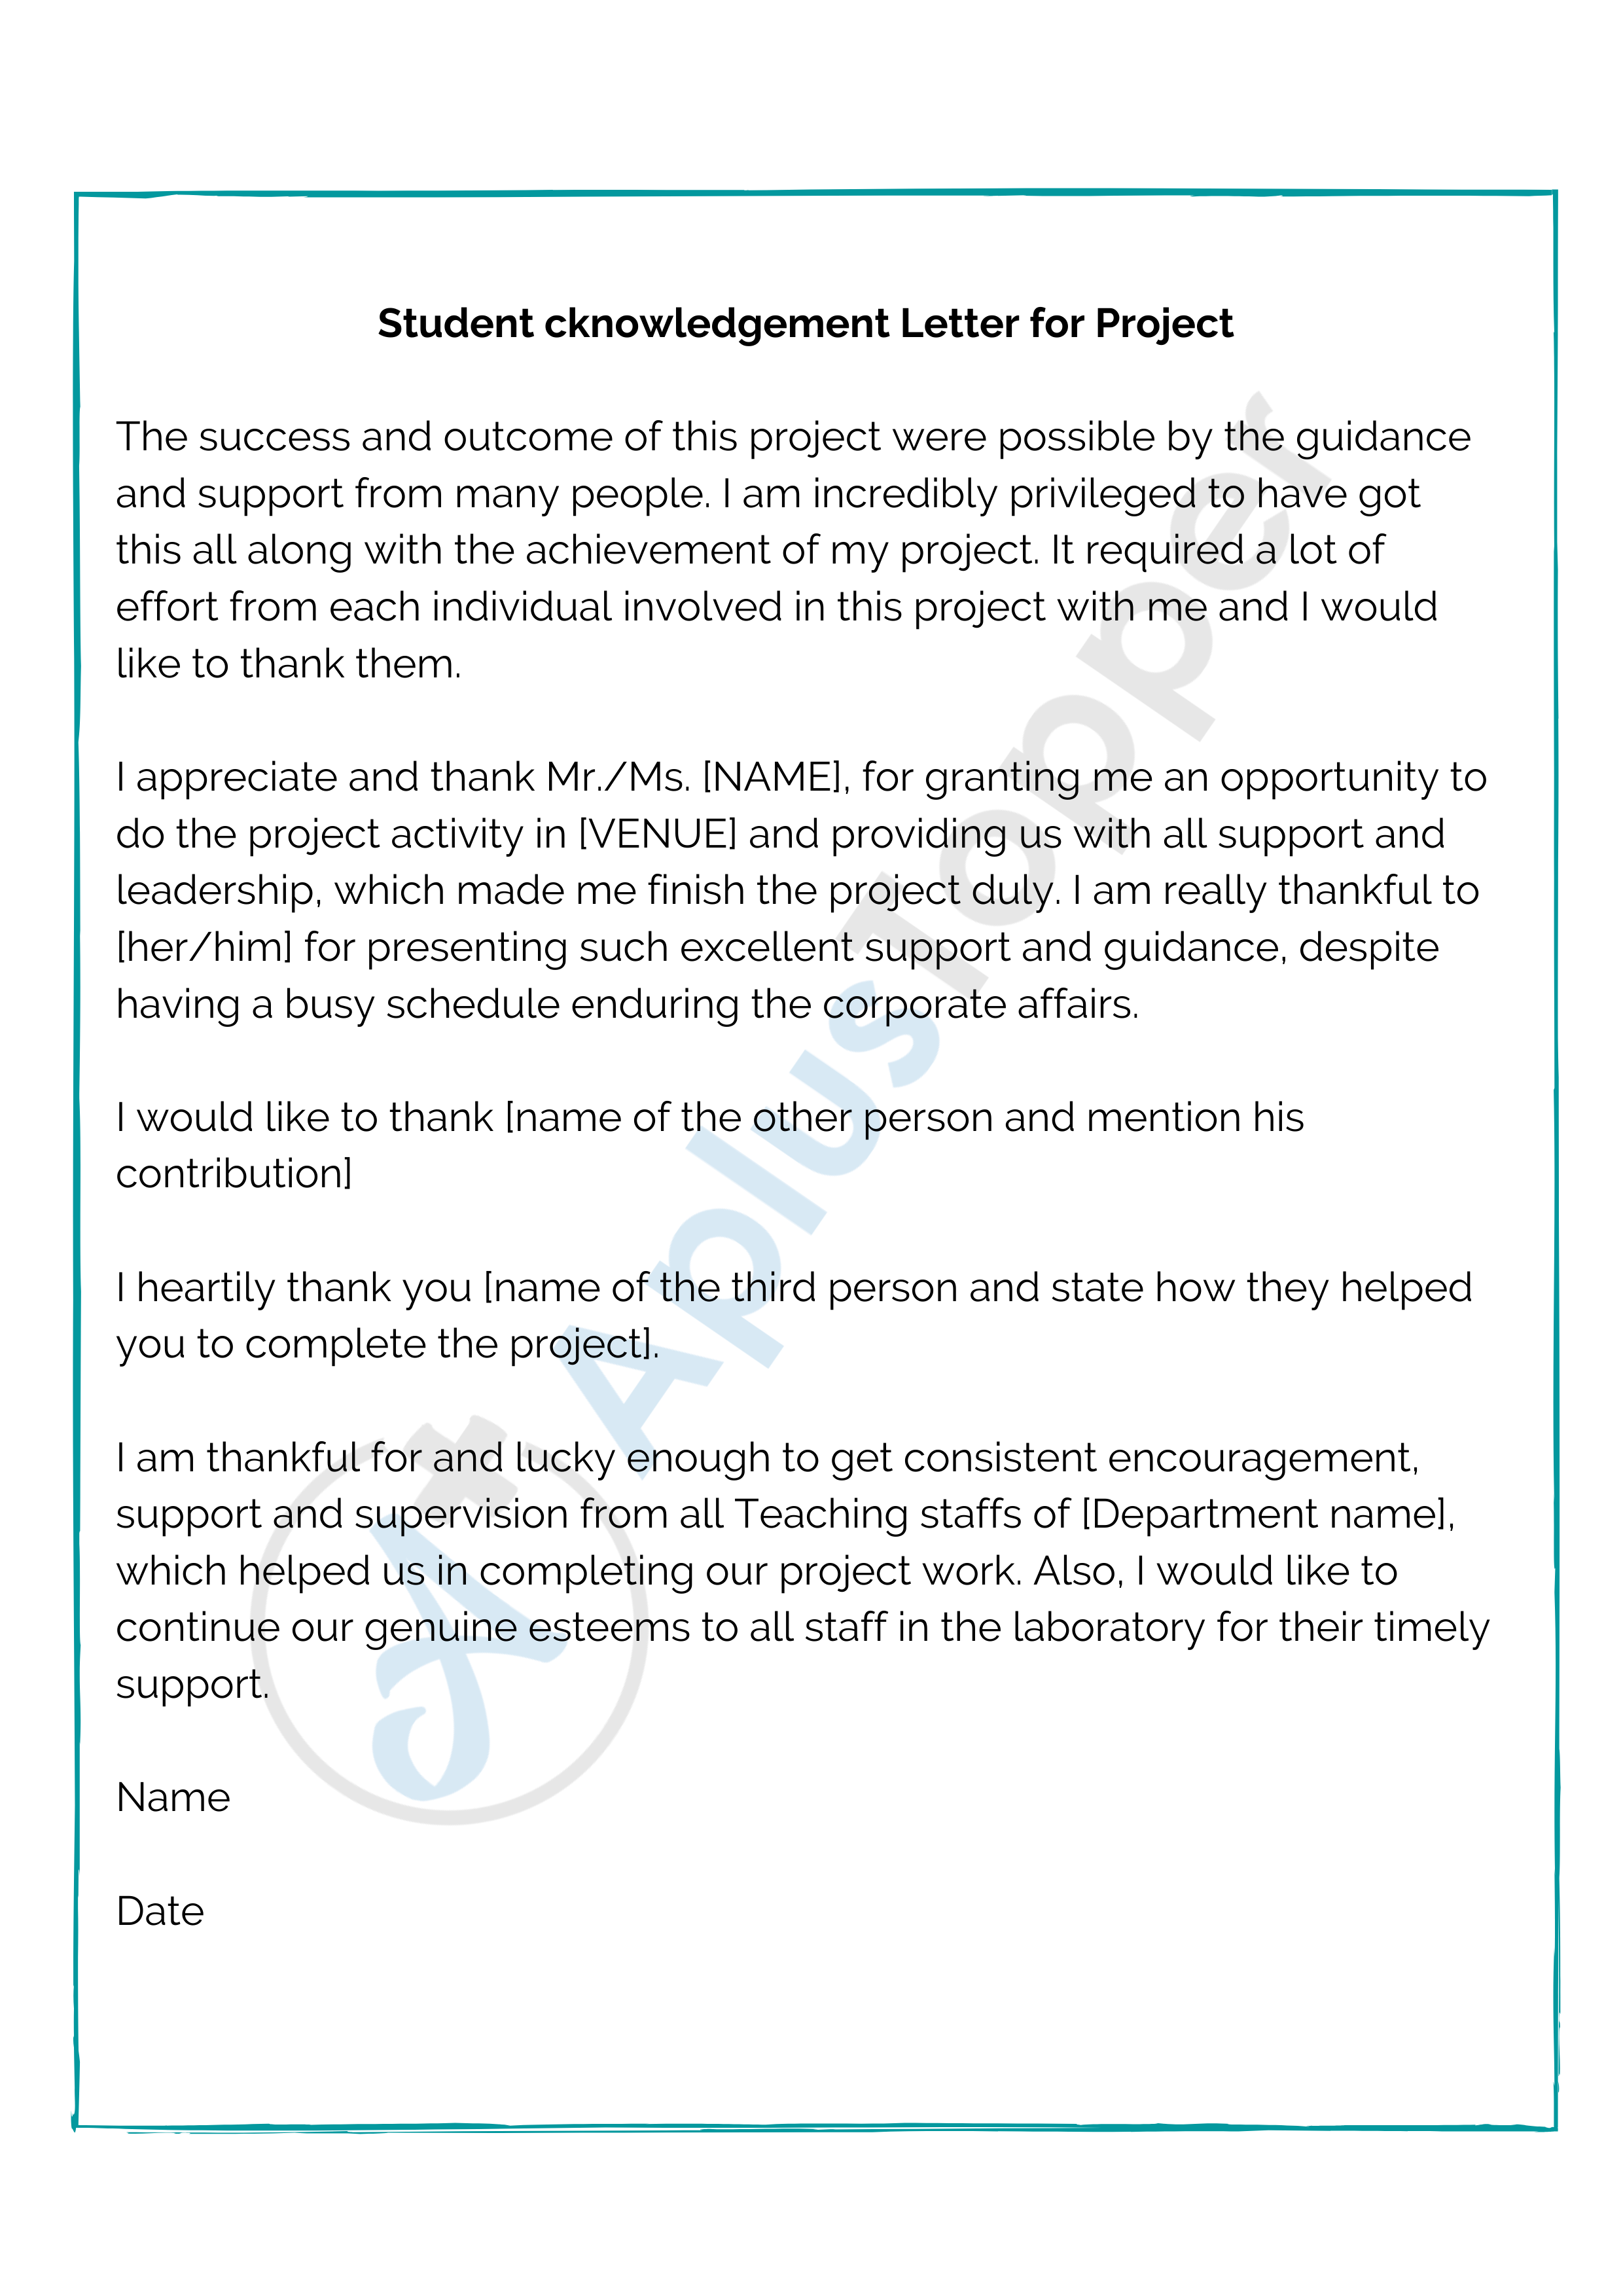 Acknowledgement Letter  Format, Samples, Template, How To Write